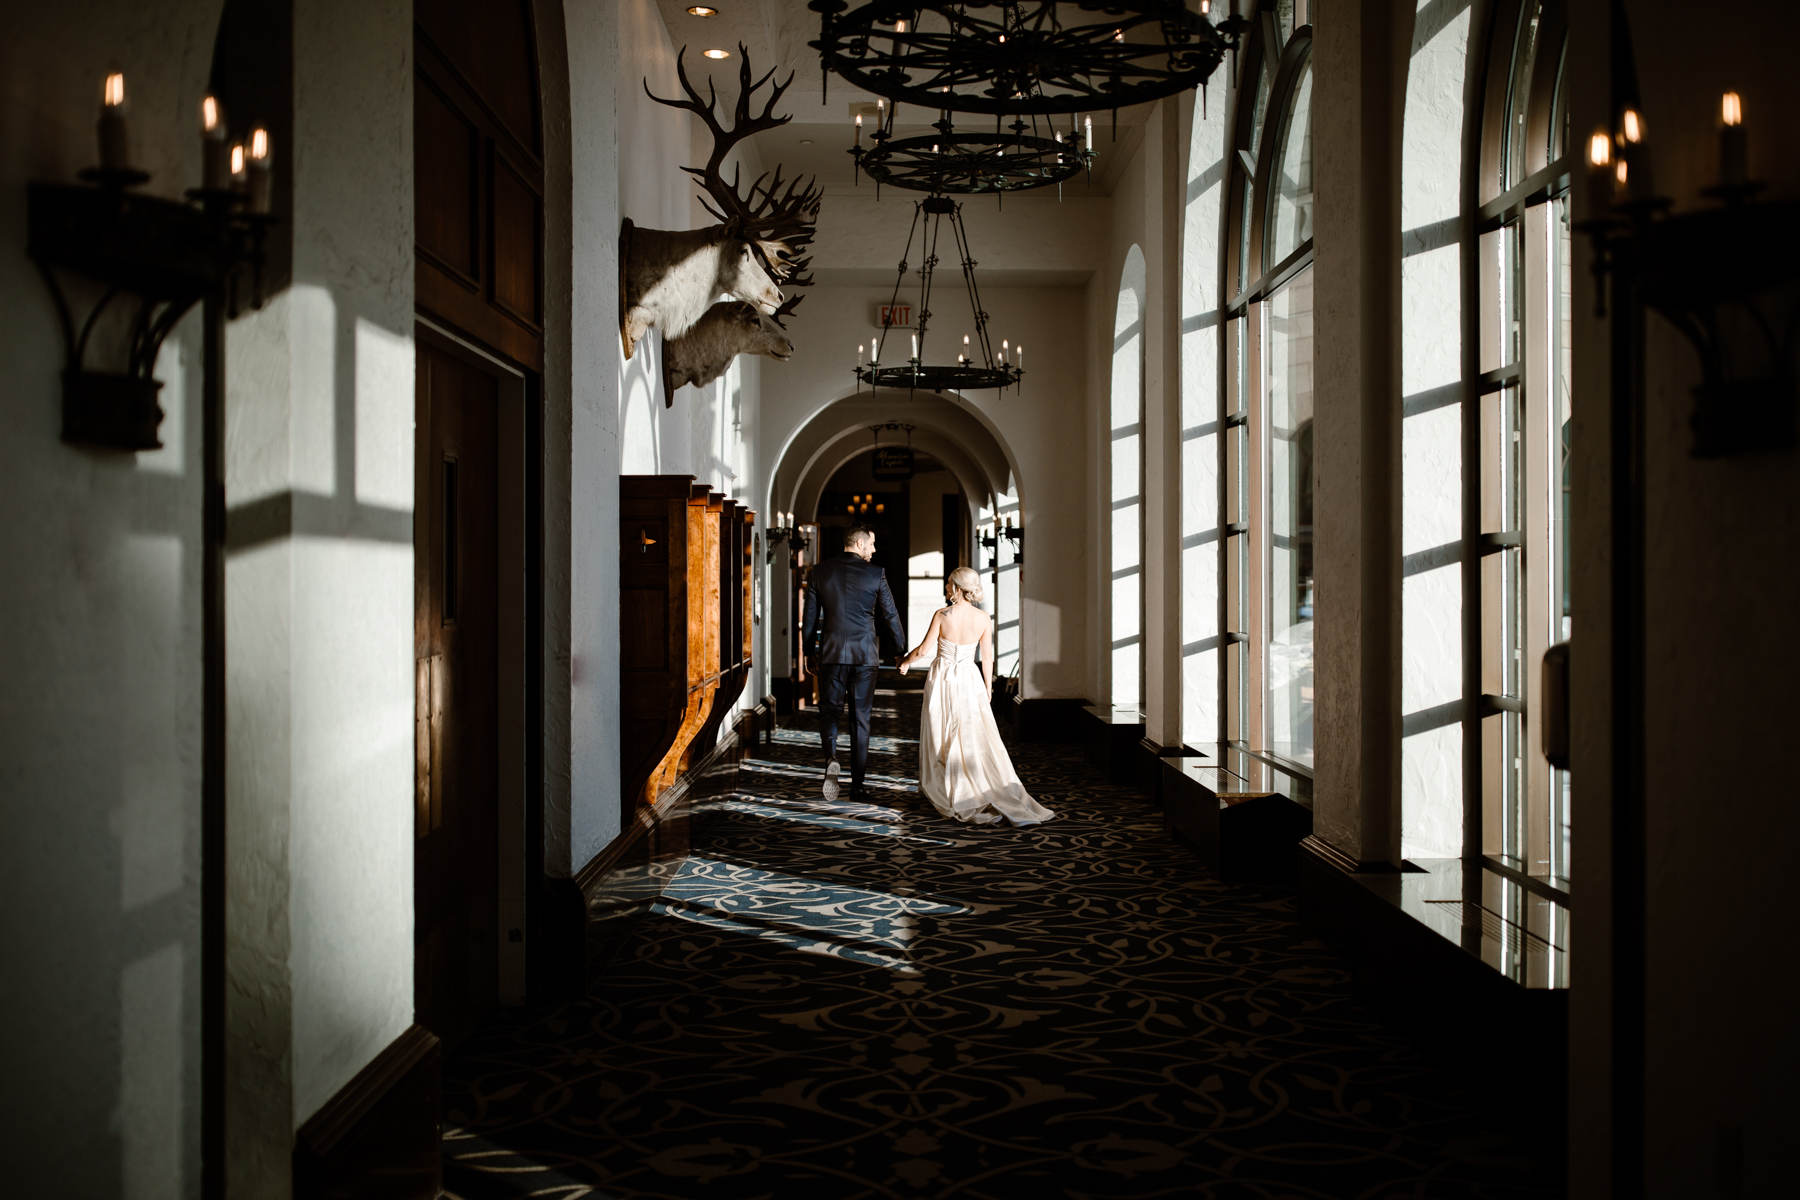 Fairmont Chateau Lake Louise Wedding Photography in Winter - Image 15